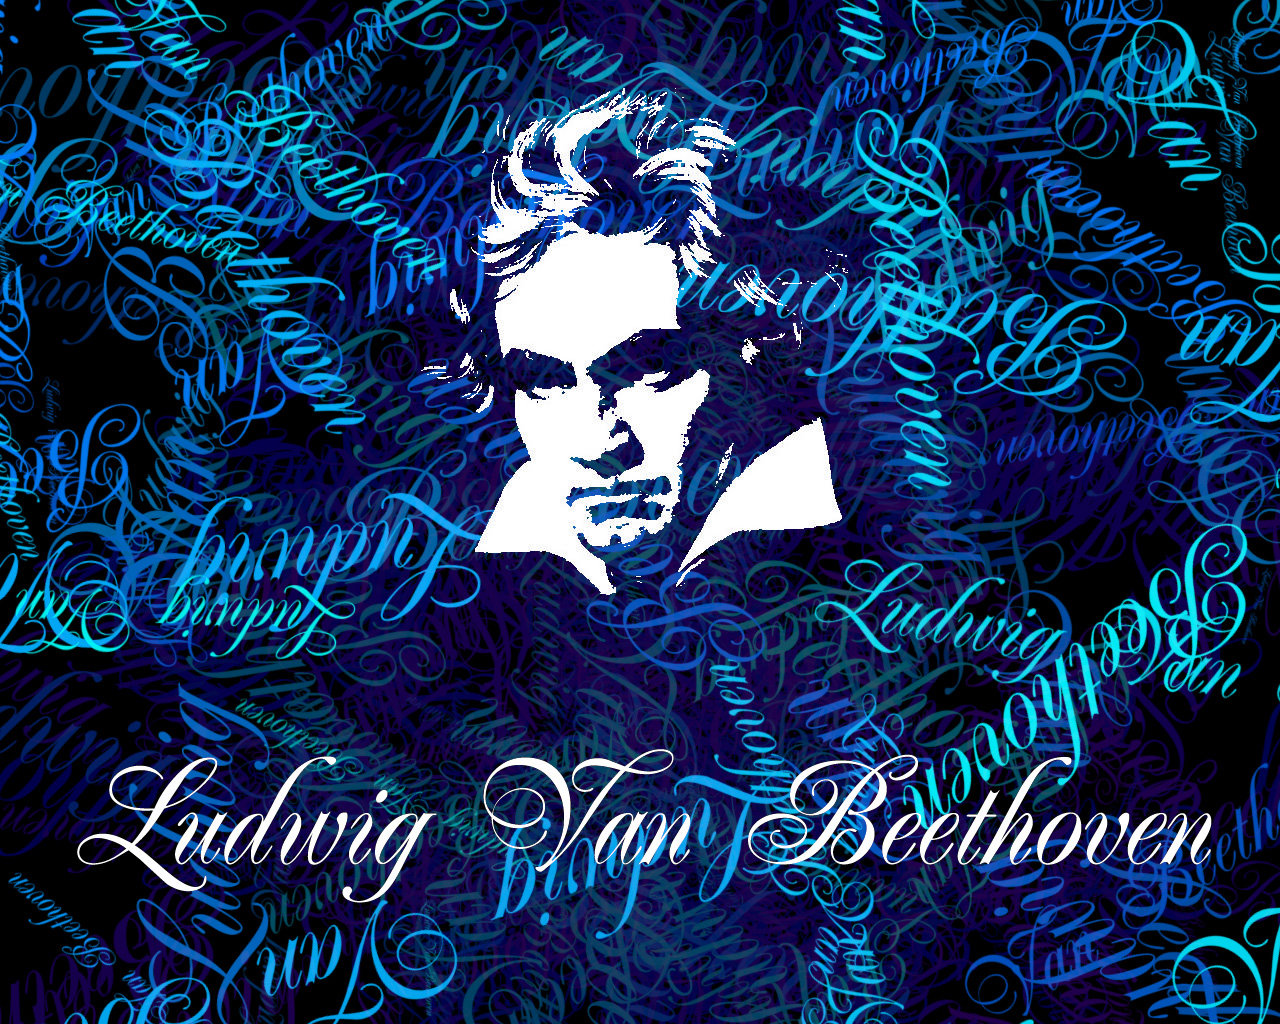 Beethoven Wallpaper Widescreen On Jakpost Travel